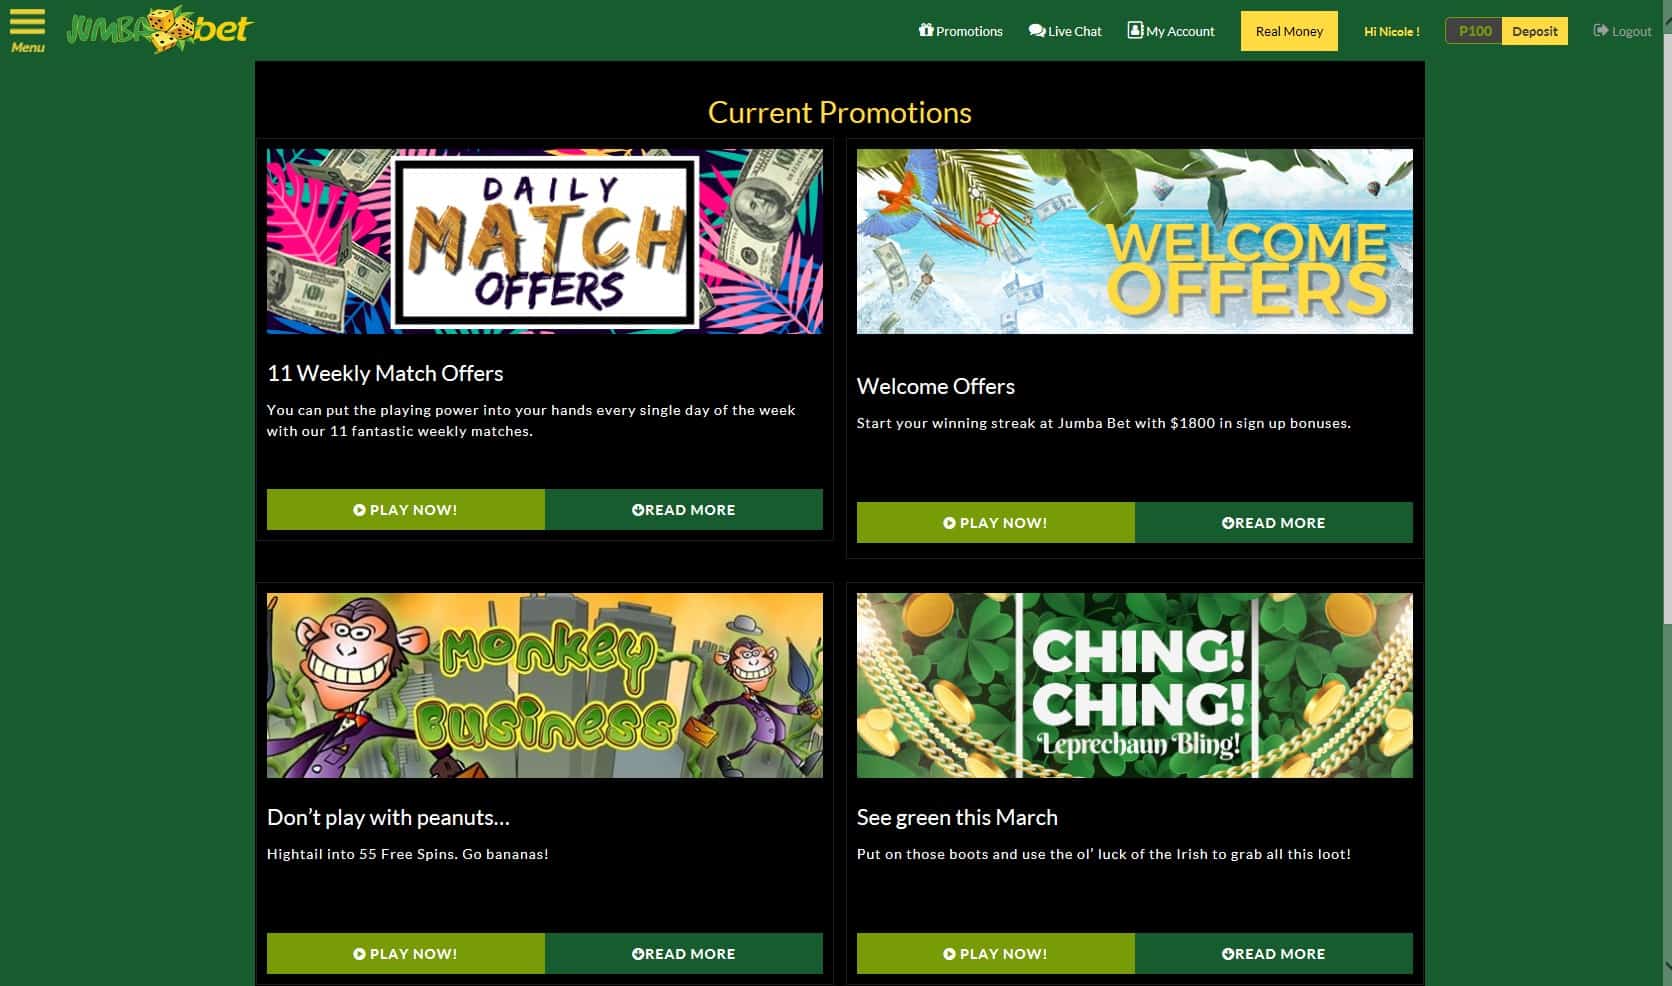 highest payout online casino